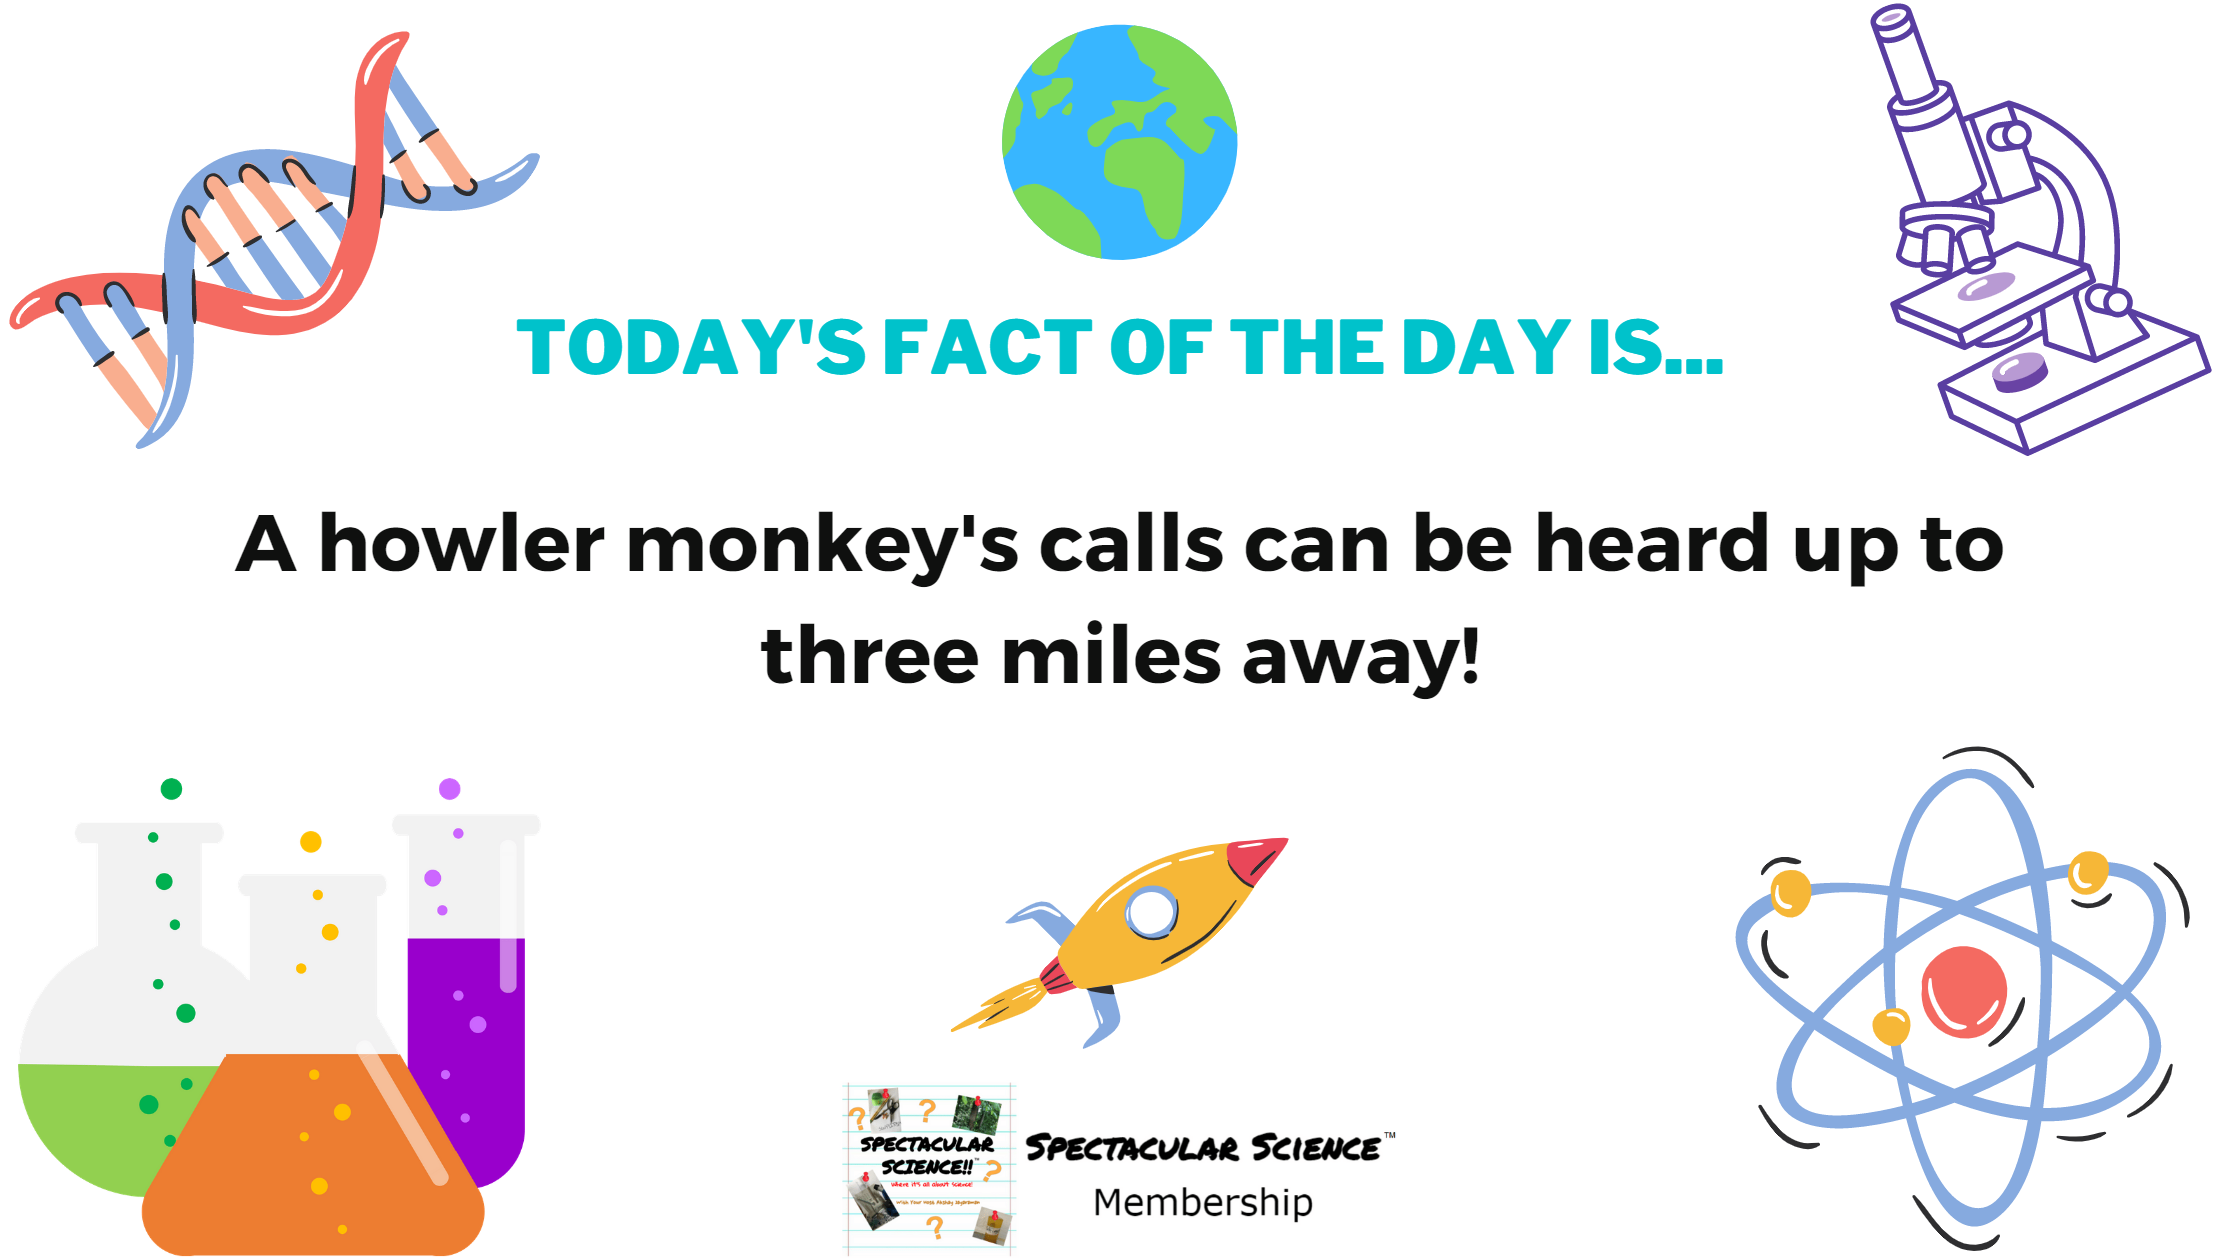 Fact of the Day Image January 27th